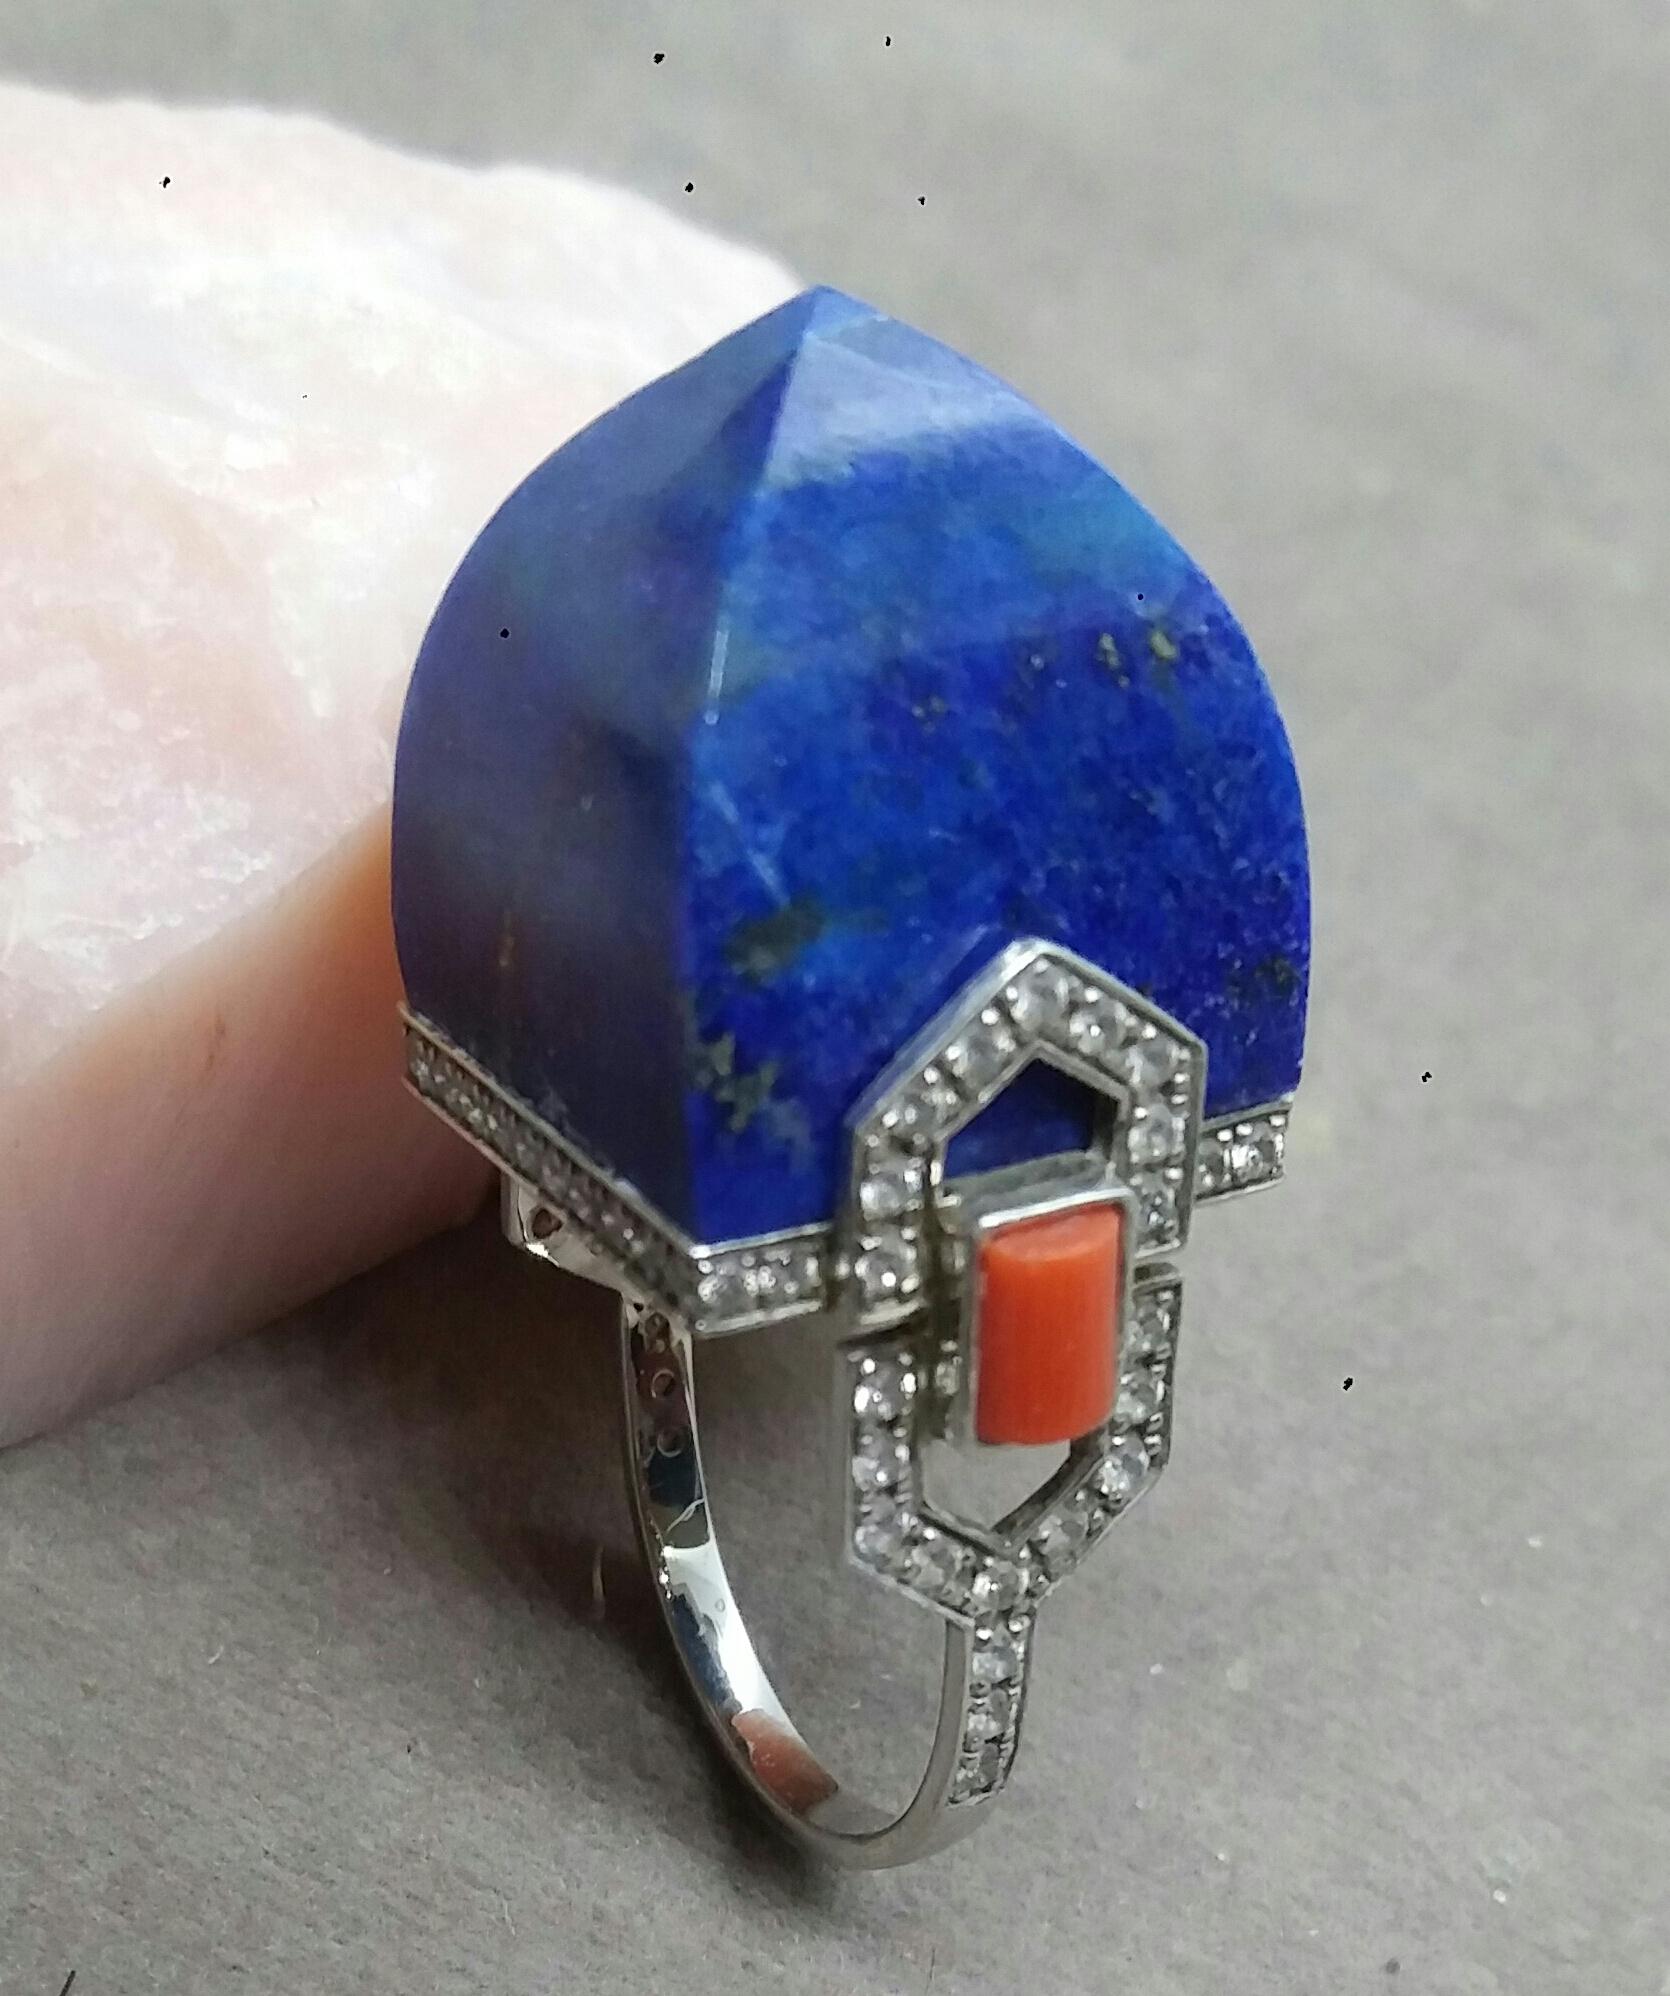 Unique and classic handmade Art Deco Style cocktail ring with a Genuine Lapis Lazuli Pyramid measuring 16x16 mm set in a 14 kt yellow solid gold mounting,including 70 full cut diamonds

In 1978 our workshop started in Italy to make simple-chic Art